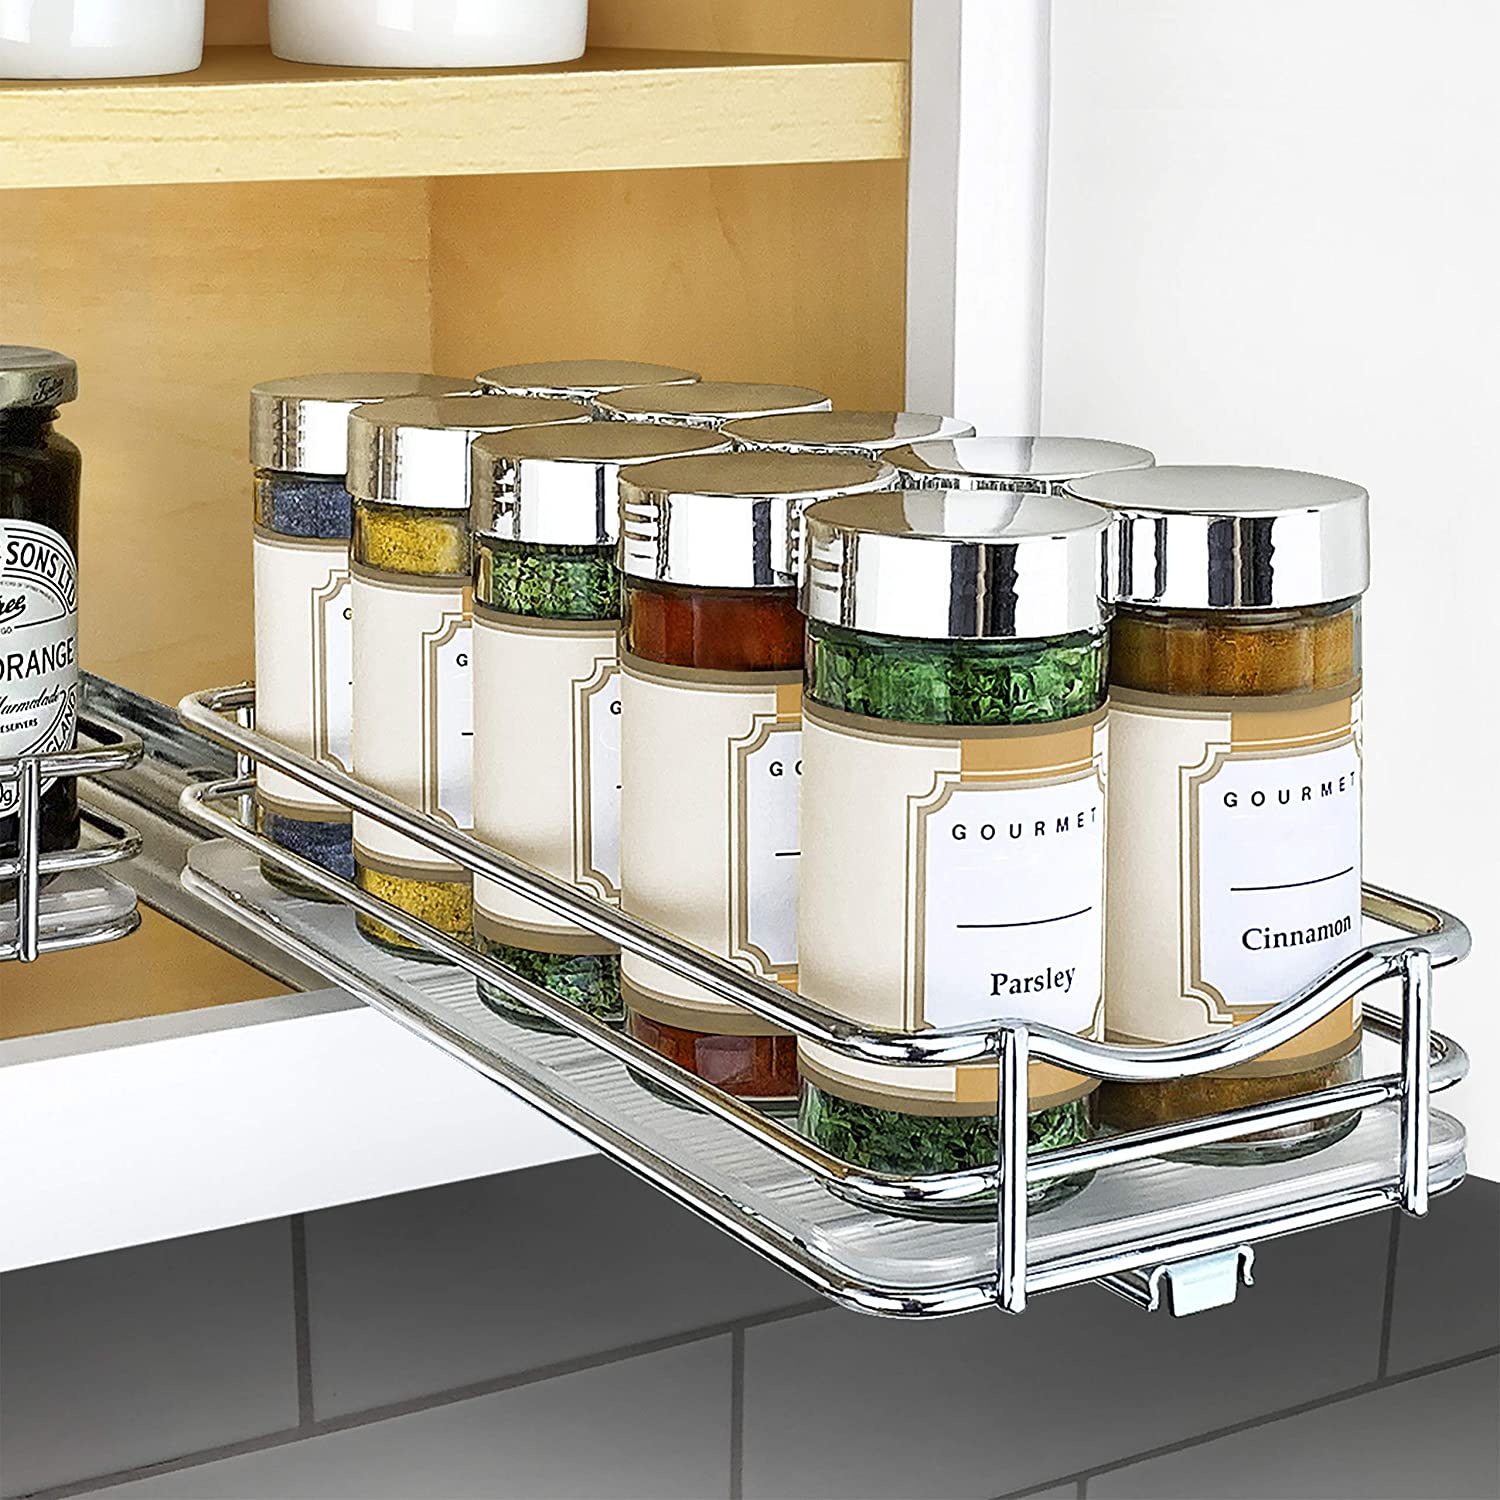 This $20 Kitchen Cabinet Organizer Maximizes Every Inch of a Small Space